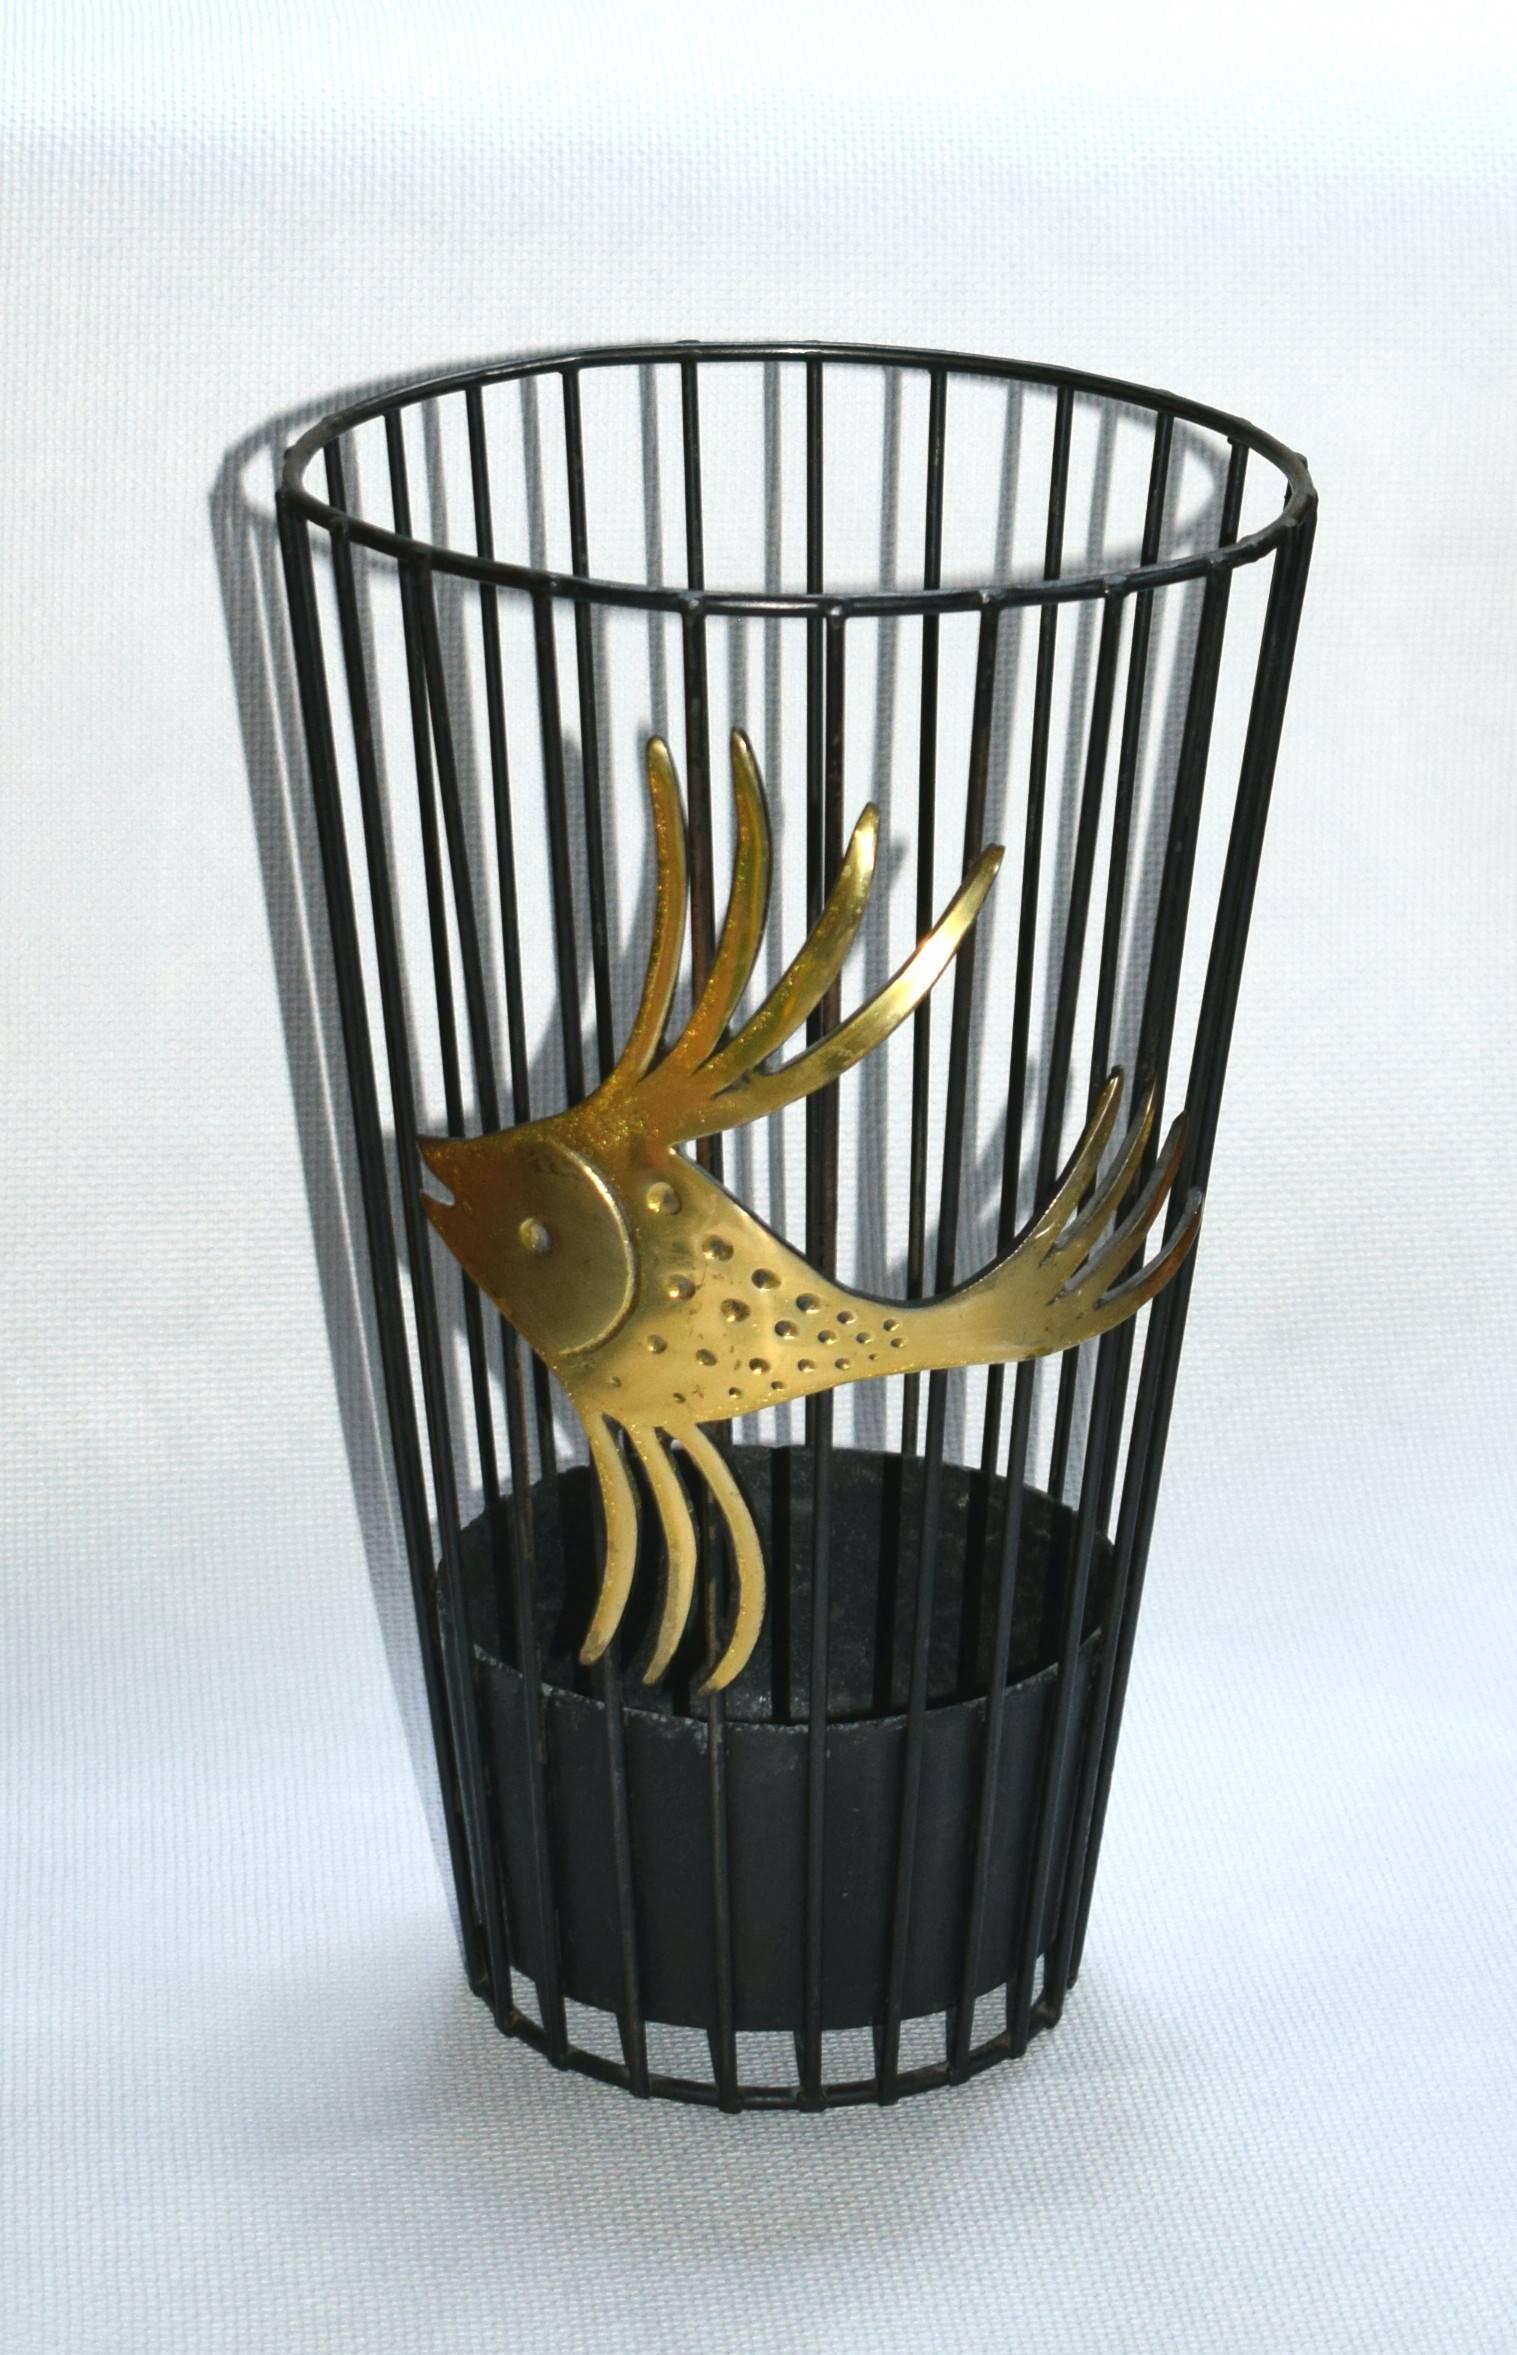 This umbrella stand was designed by Walter Bosse in Vienna. It is made from black wire steel with a bowl inside and a large and decorative brass fish on the outside.

